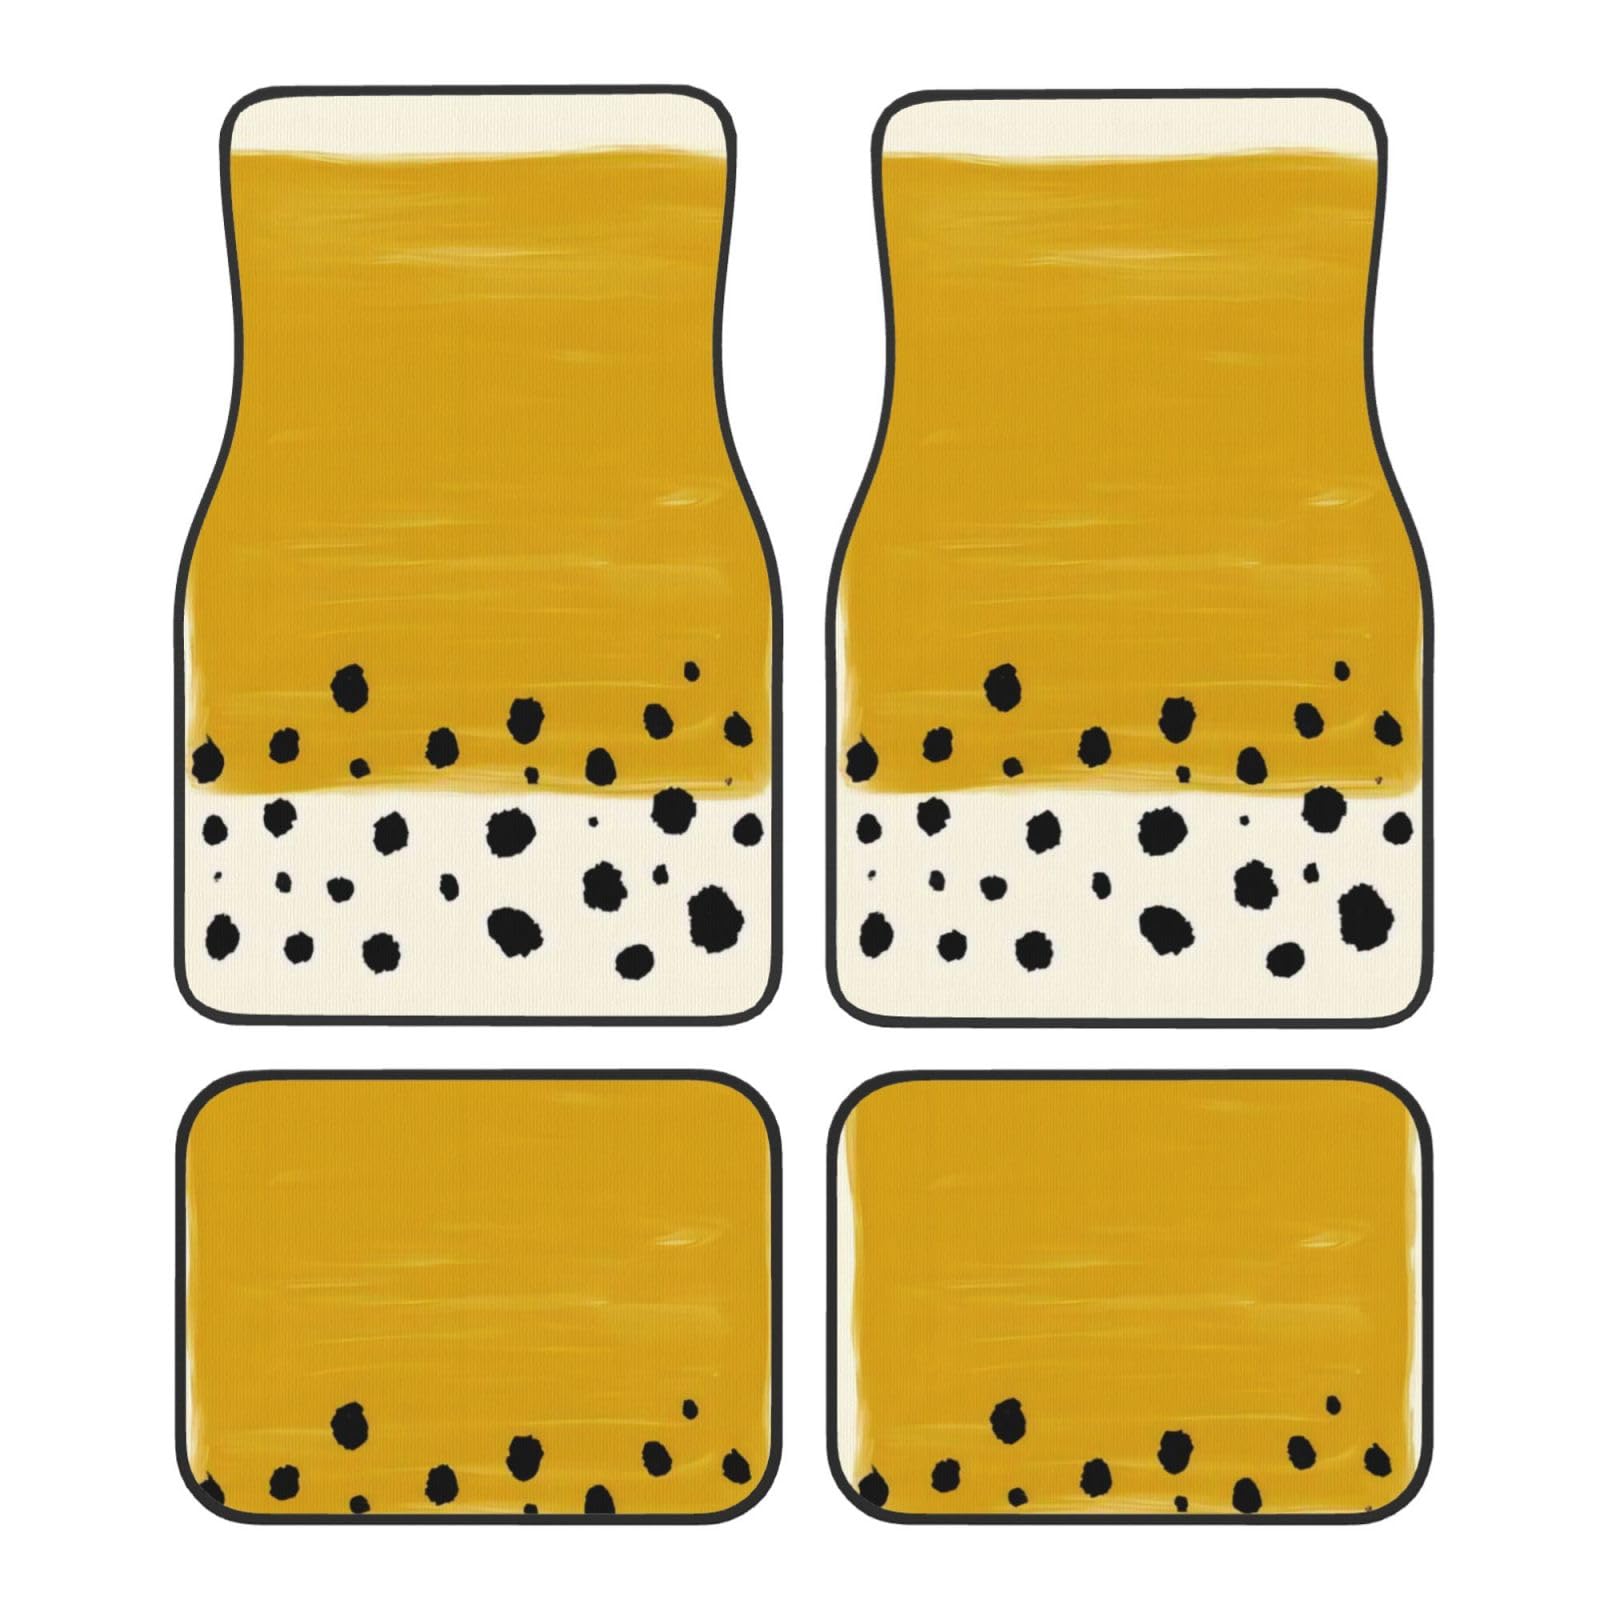 IDETECTOR Mustard Yellow and Black Printed Car Foot Mat Four Piece Set Universal Car Decorations von IDETECTOR